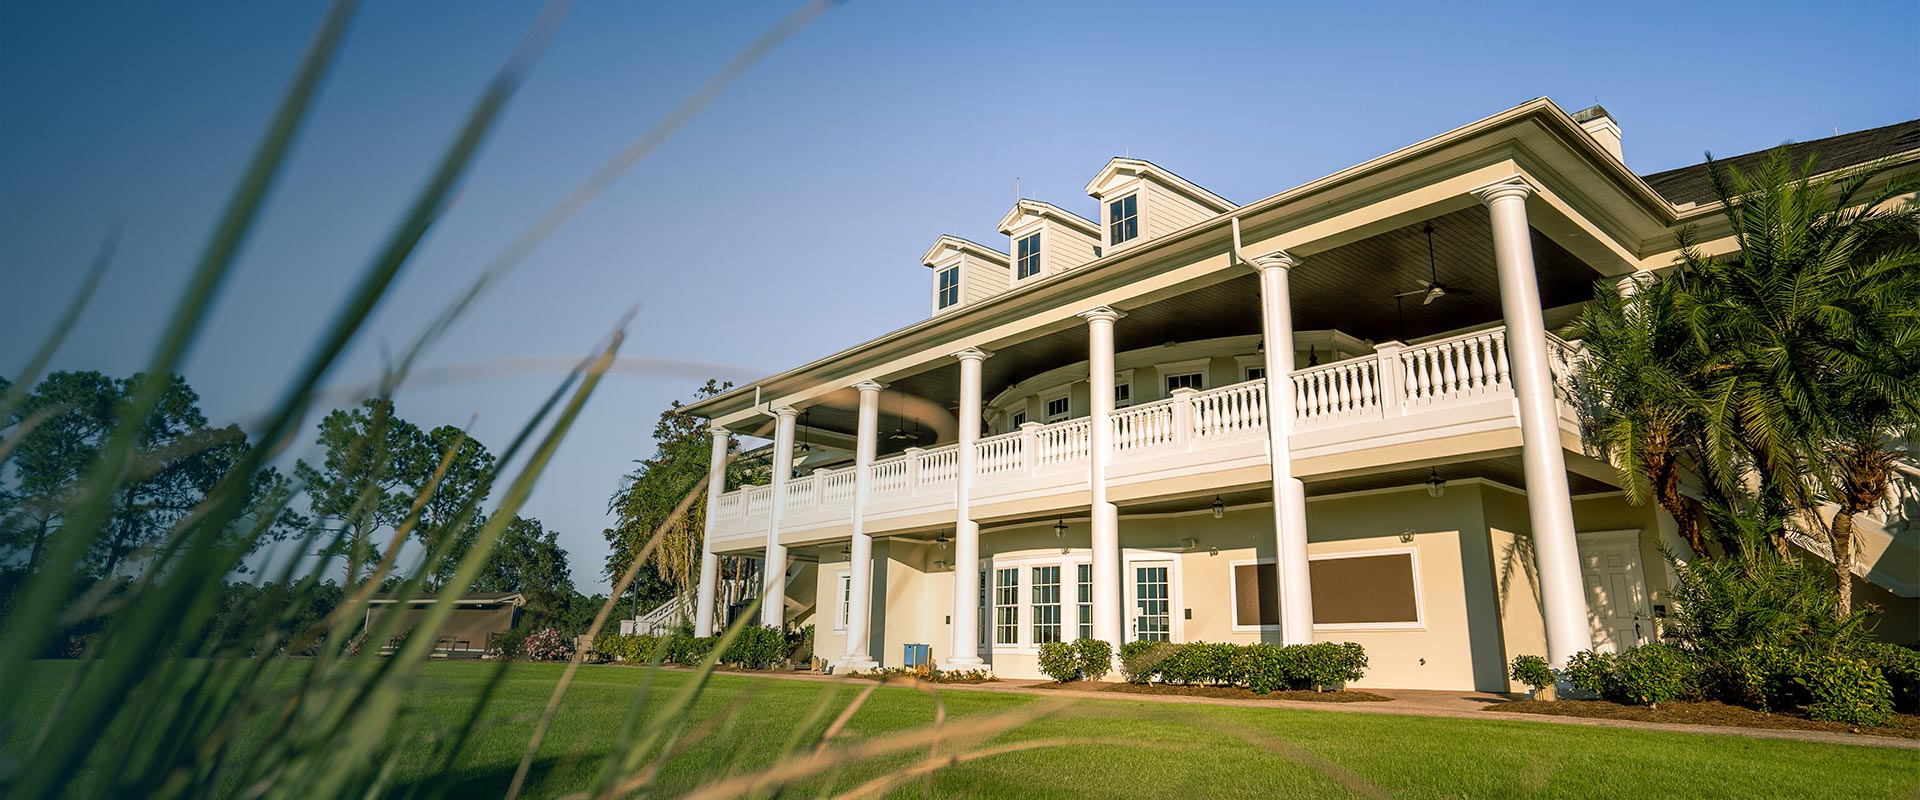 Home - Southern Hills Country Club